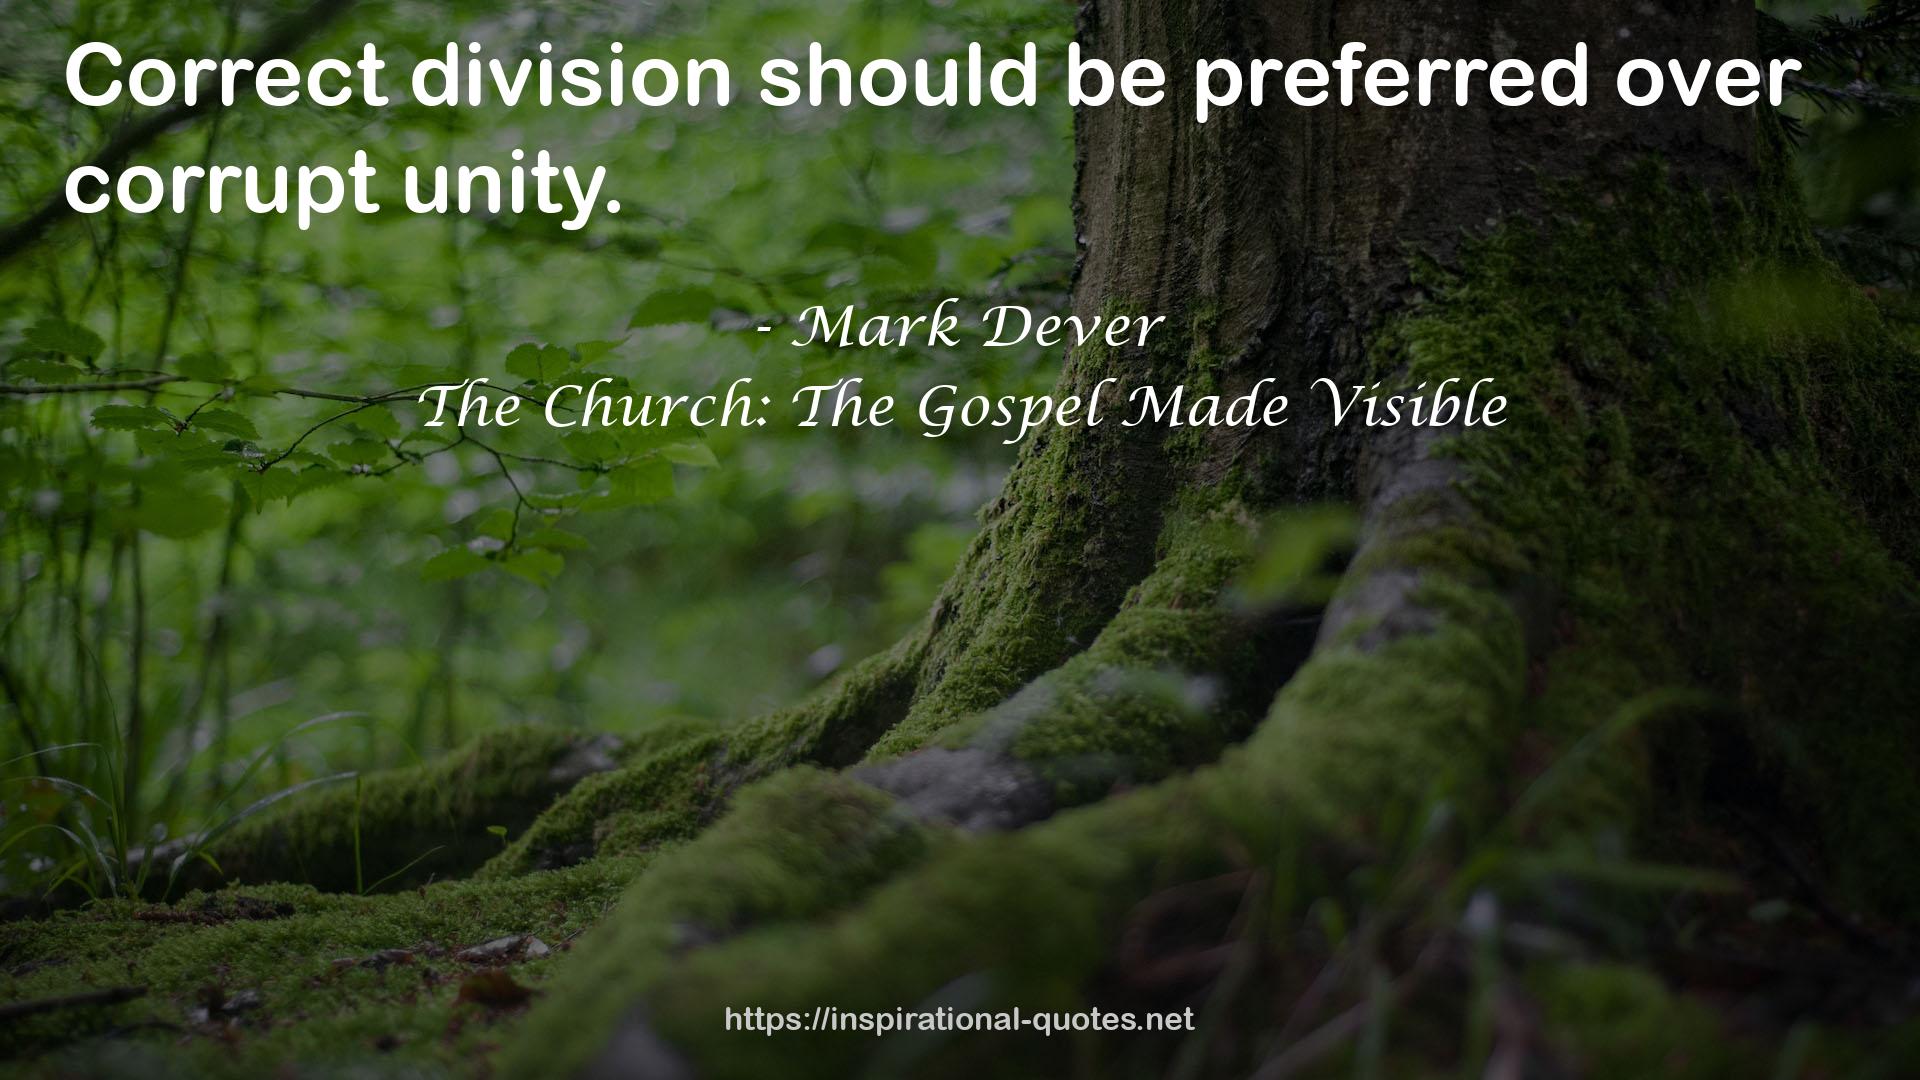 The Church: The Gospel Made Visible QUOTES